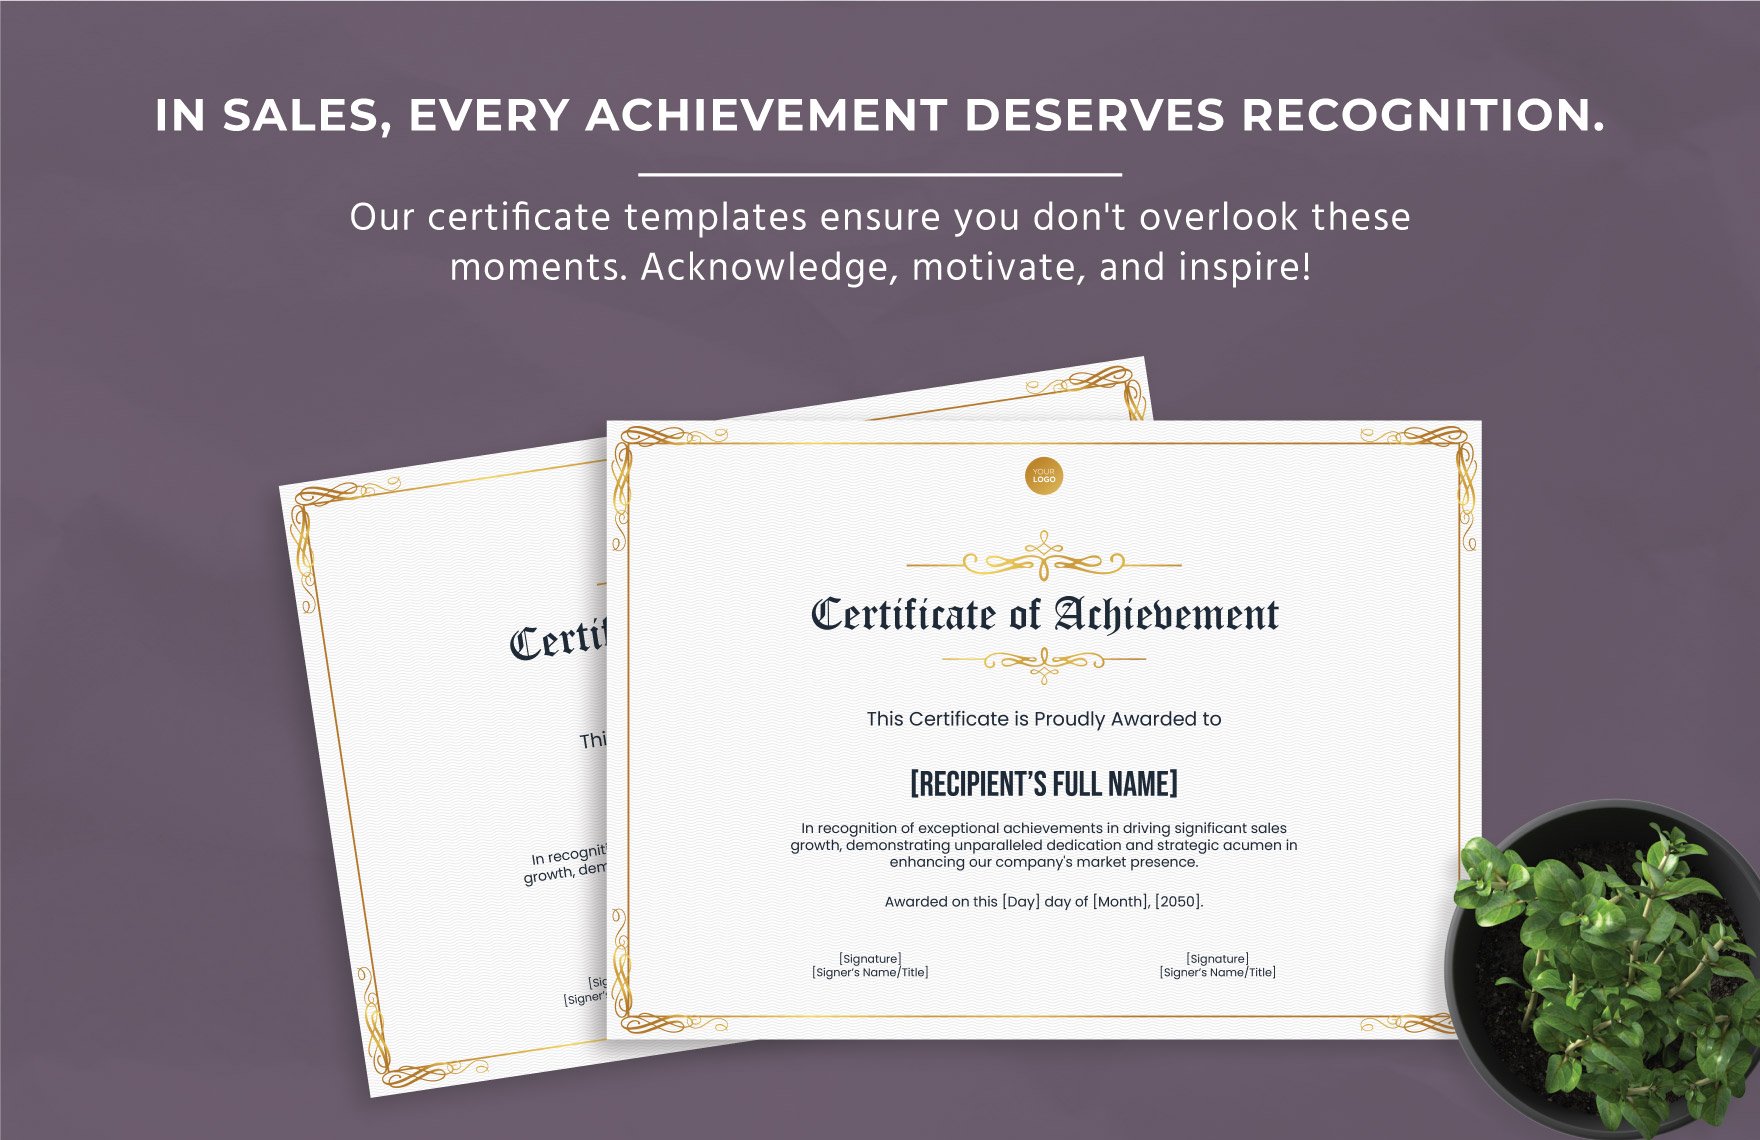 Certificate of Achievement in Sales Growth Template